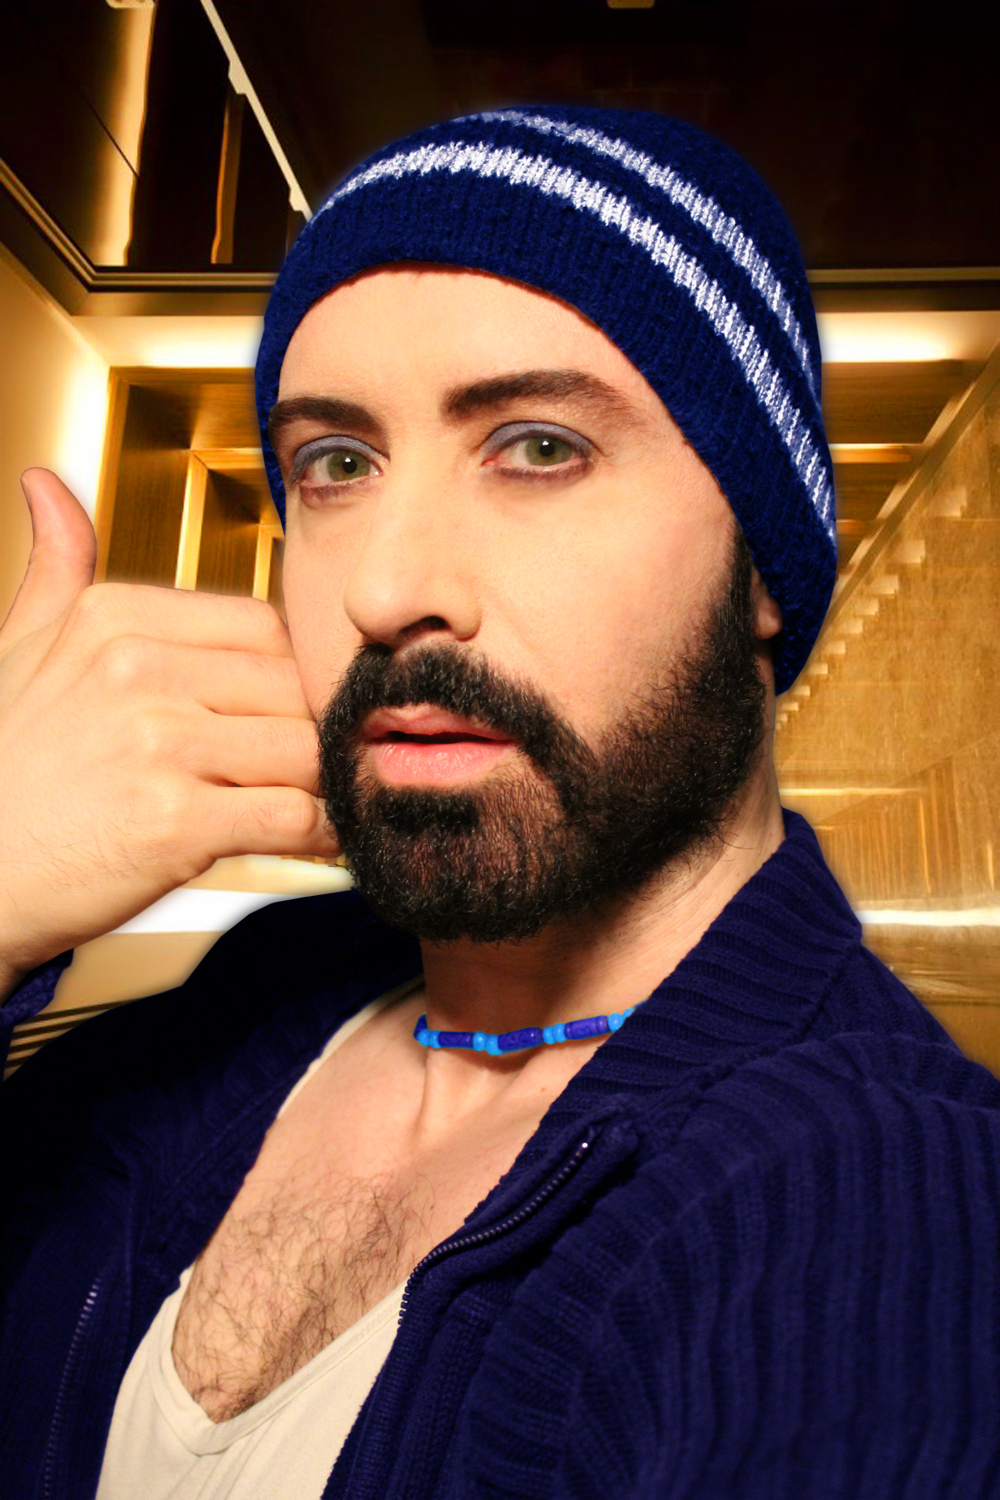 I got some fantastic news today but can't talk about it until 2015, it's like a delicious torture! #Selfie #MoonDazeTV #RealityShow #NewSeason #ComingIn2015 #BeardEra #NightLife #Forever